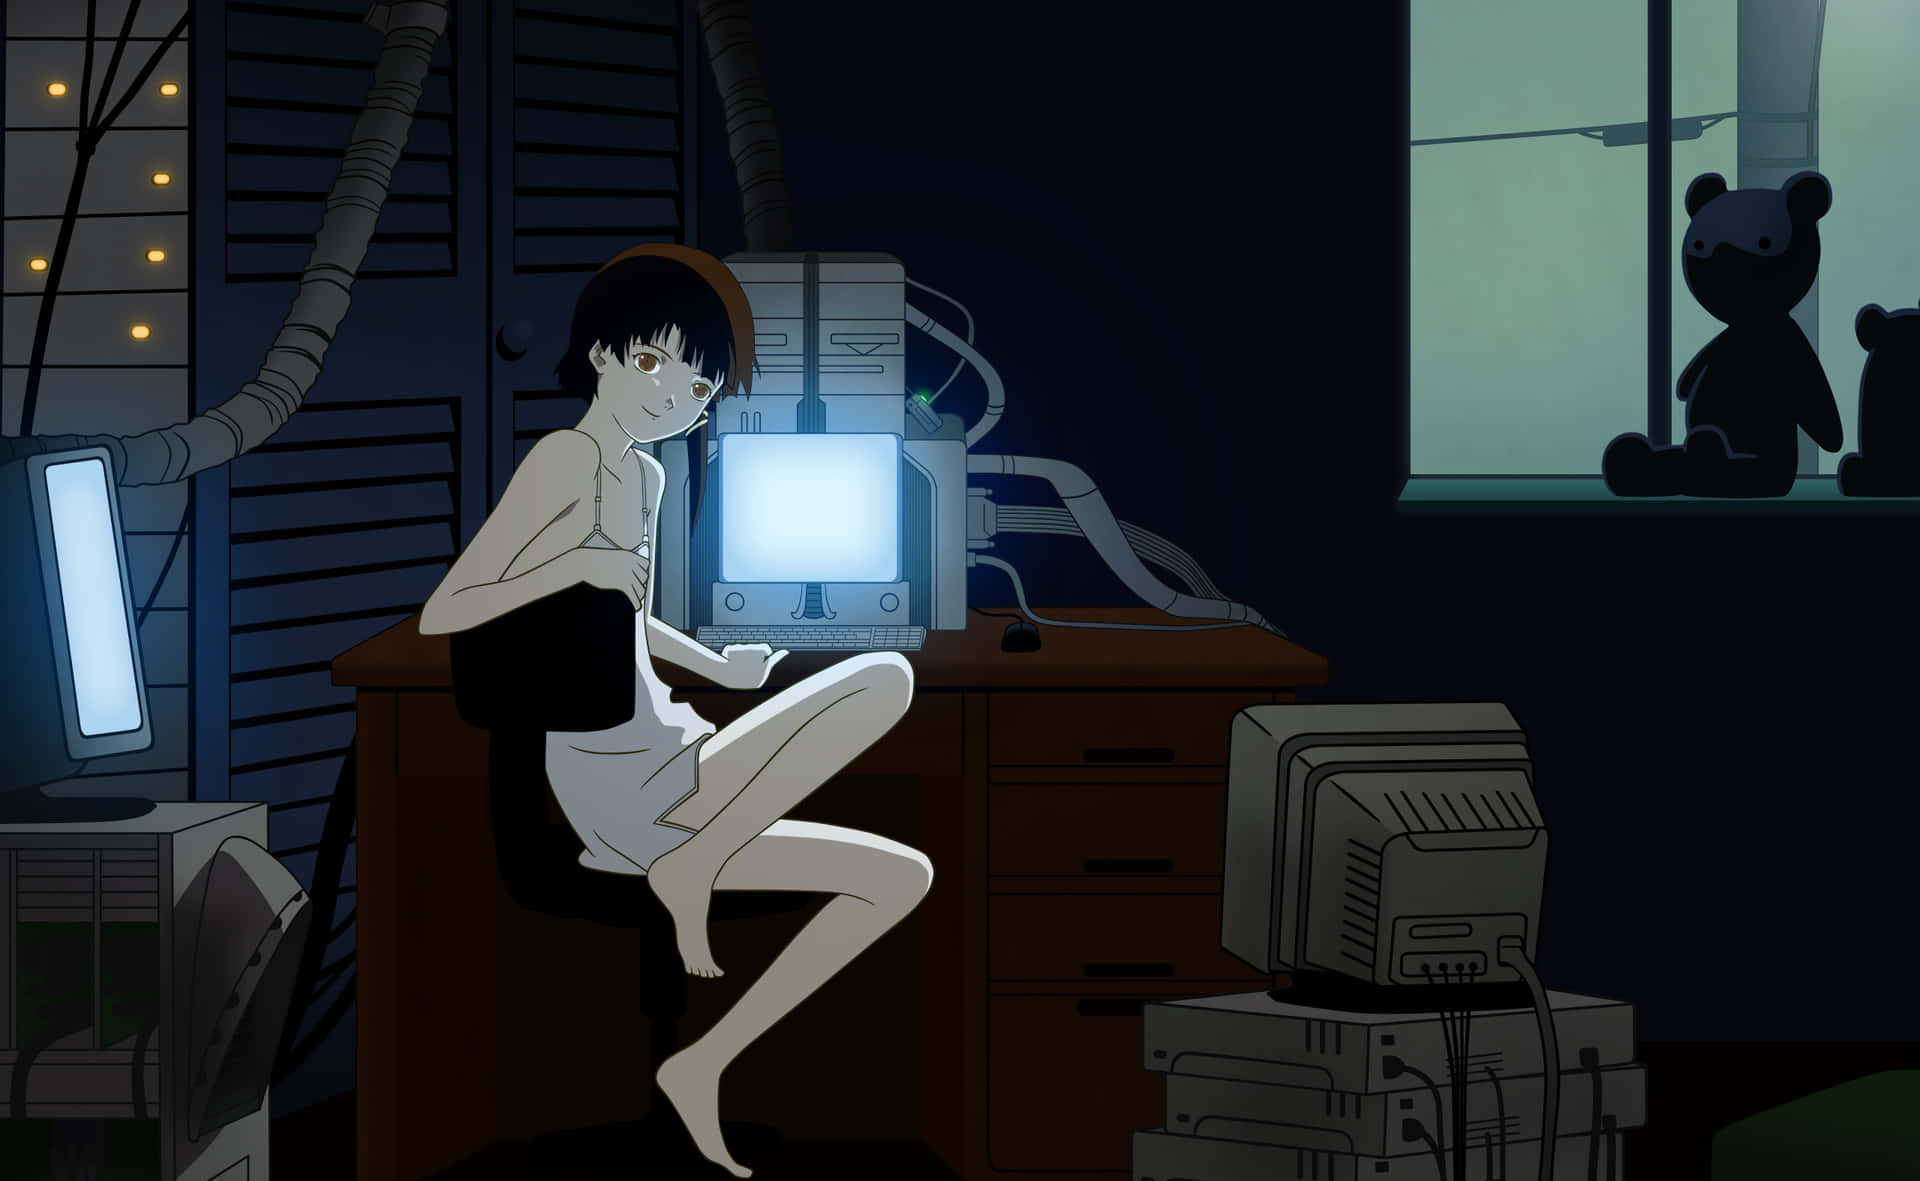 Get lost in the Wired in Serial Experiments Lain Wallpaper